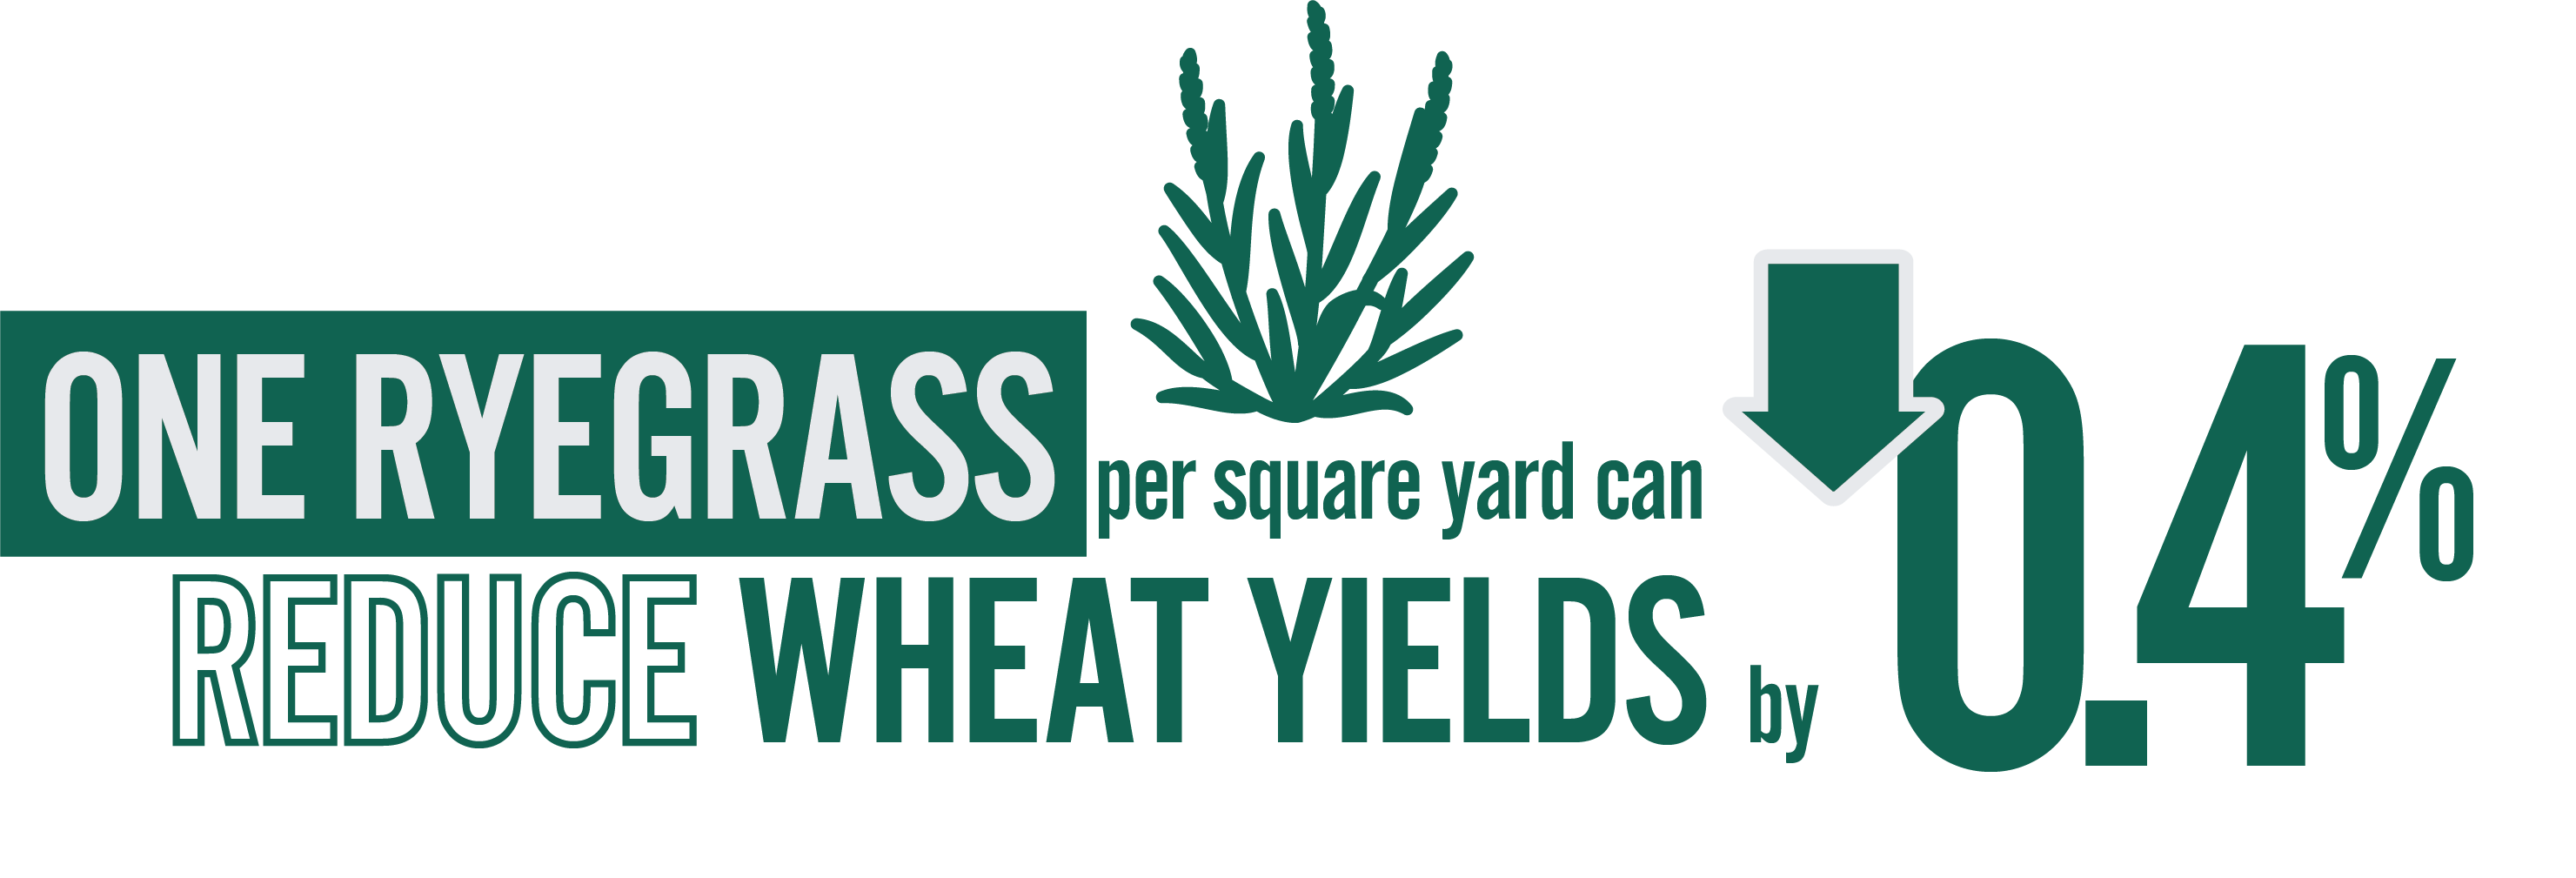 One ryegrass per square yard can reduce wheat yields by 0.4%